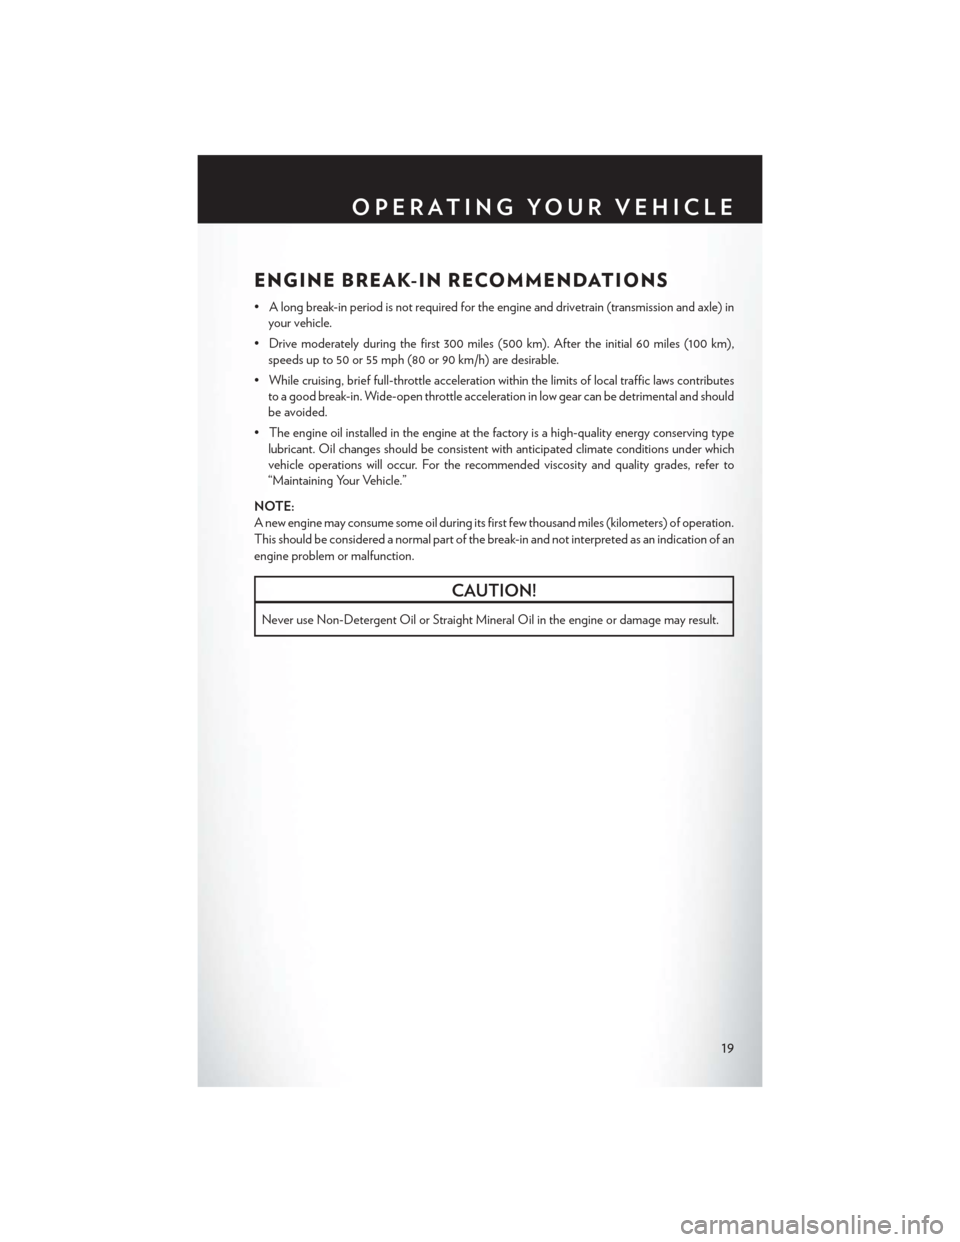 CHRYSLER 200 2014 1.G Owners Manual ENGINE BREAK-IN RECOMMENDATIONS
• A long break-in period is not required for the engine and drivetrain (transmission and axle) inyour vehicle.
• Drive moderately during the first 300 miles (500 km